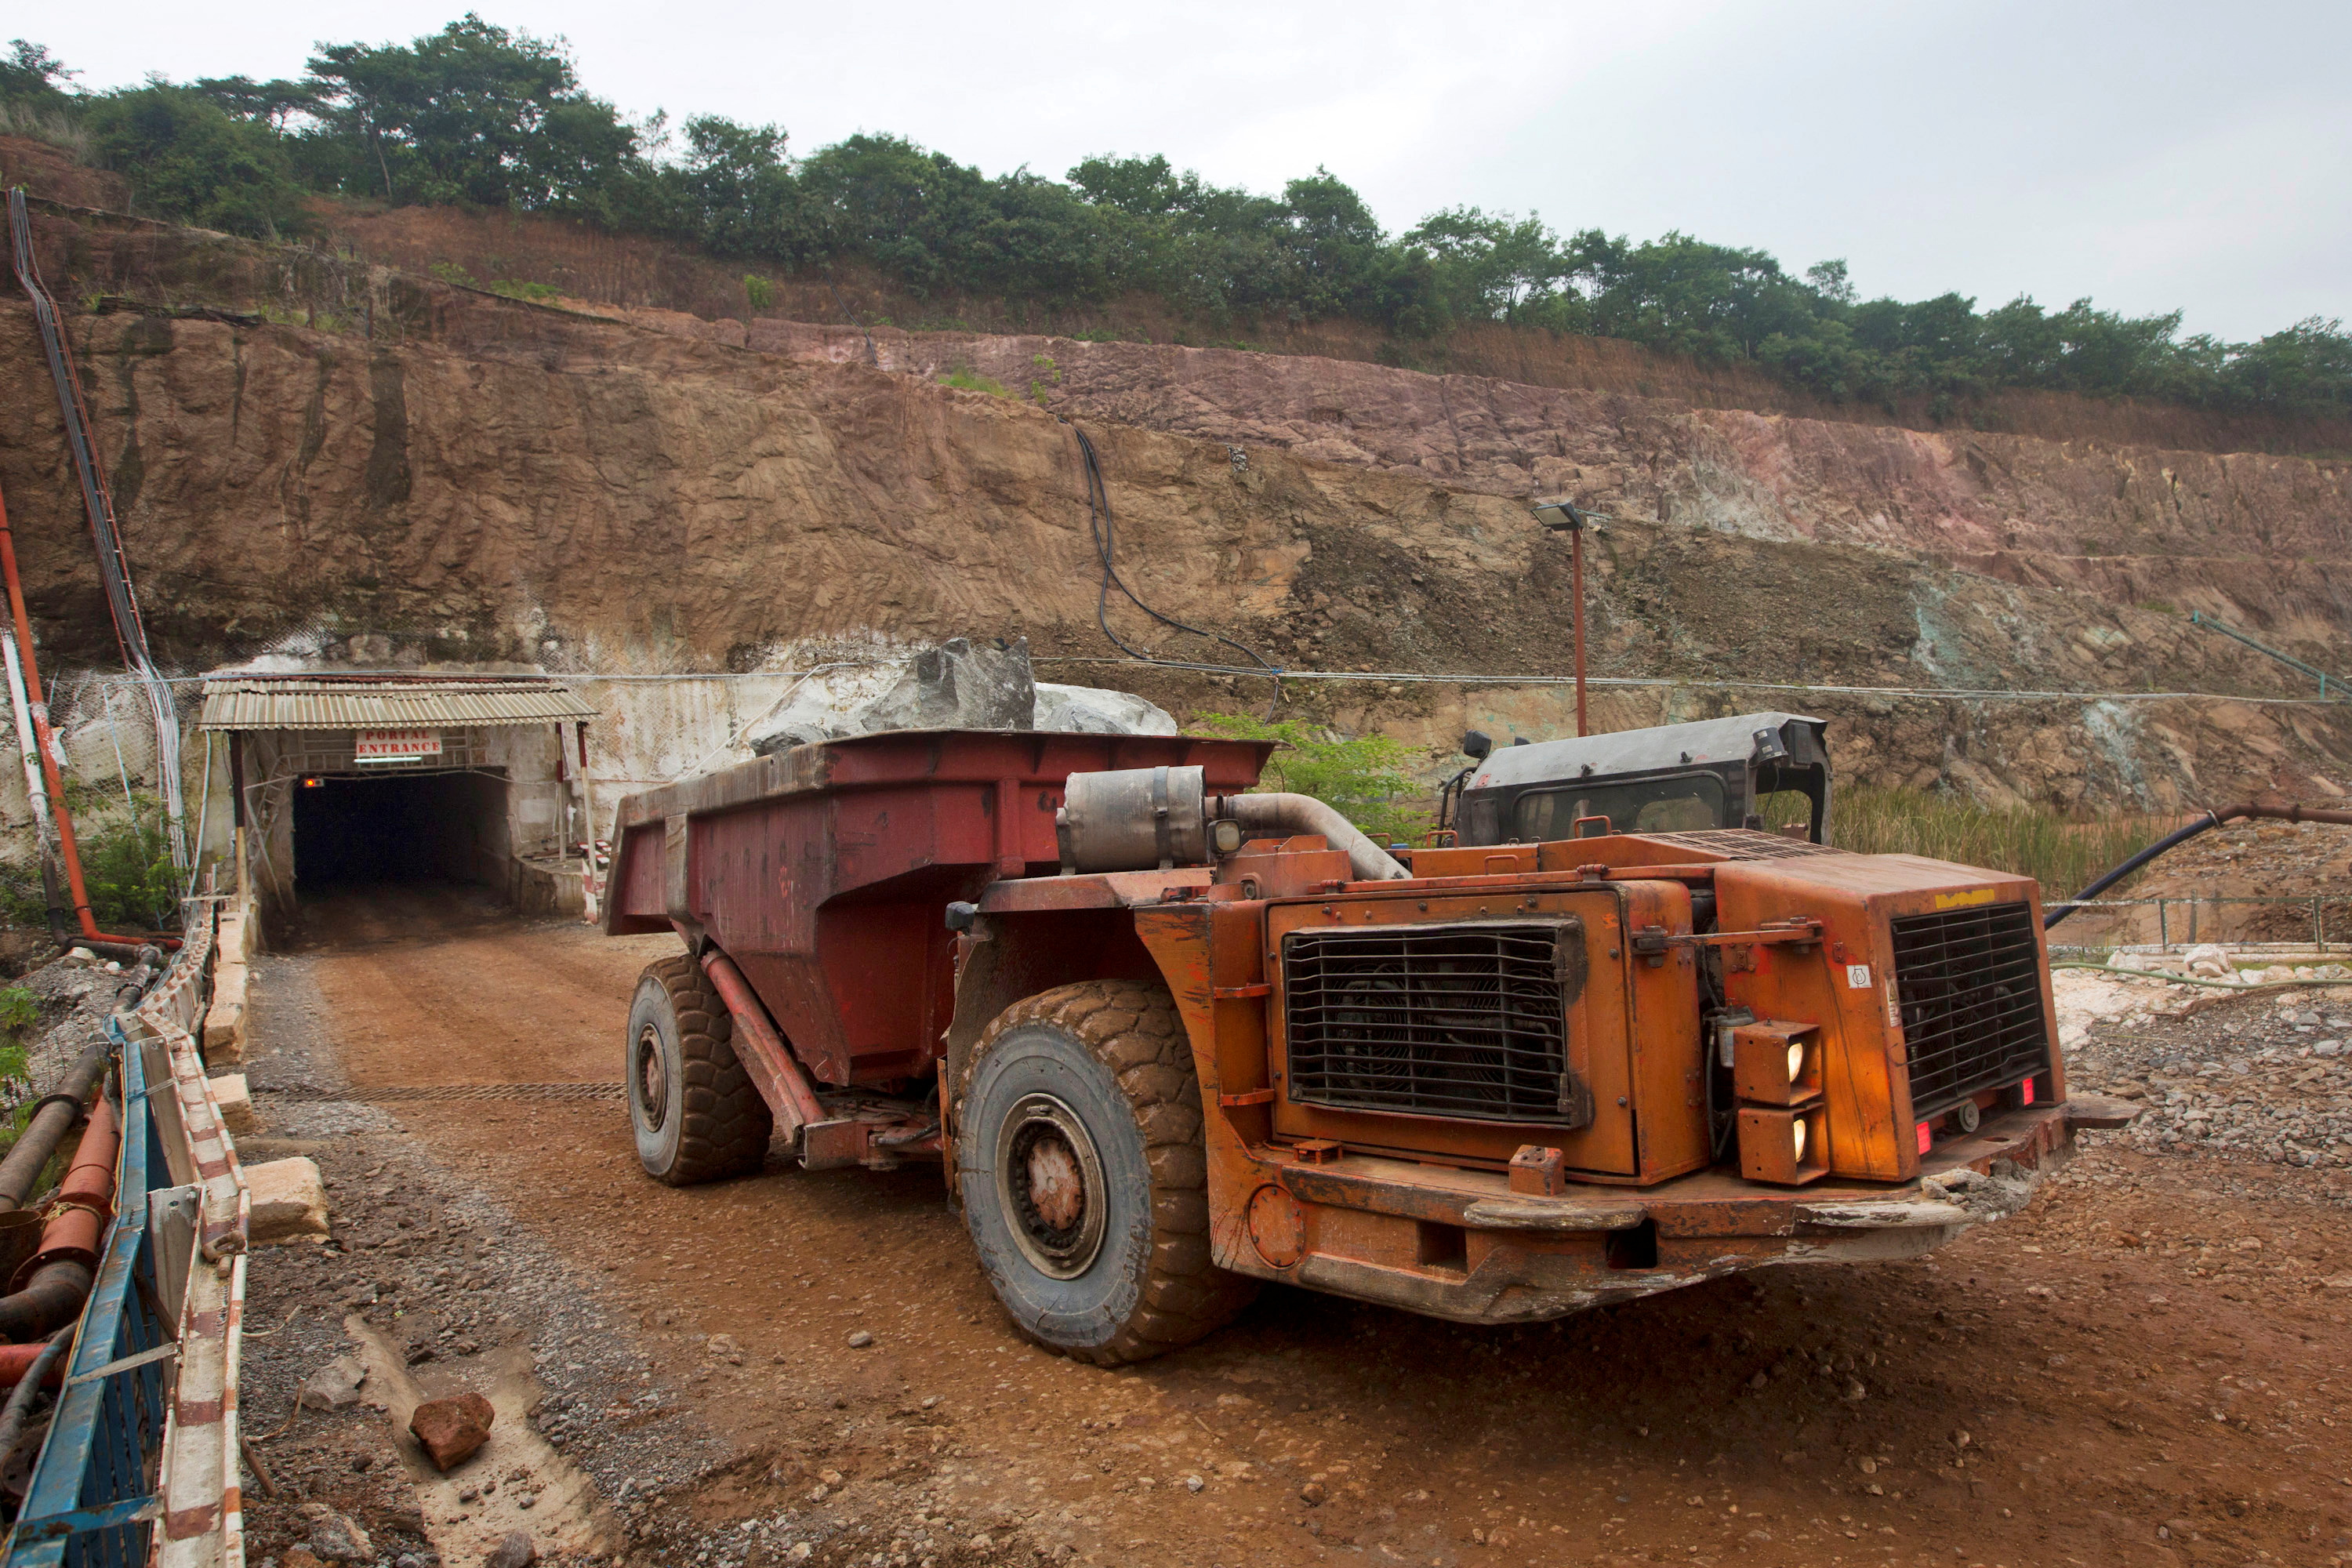 A truck exits the mine after collecting ore underground at the Chibuluma copper mine in Zambia